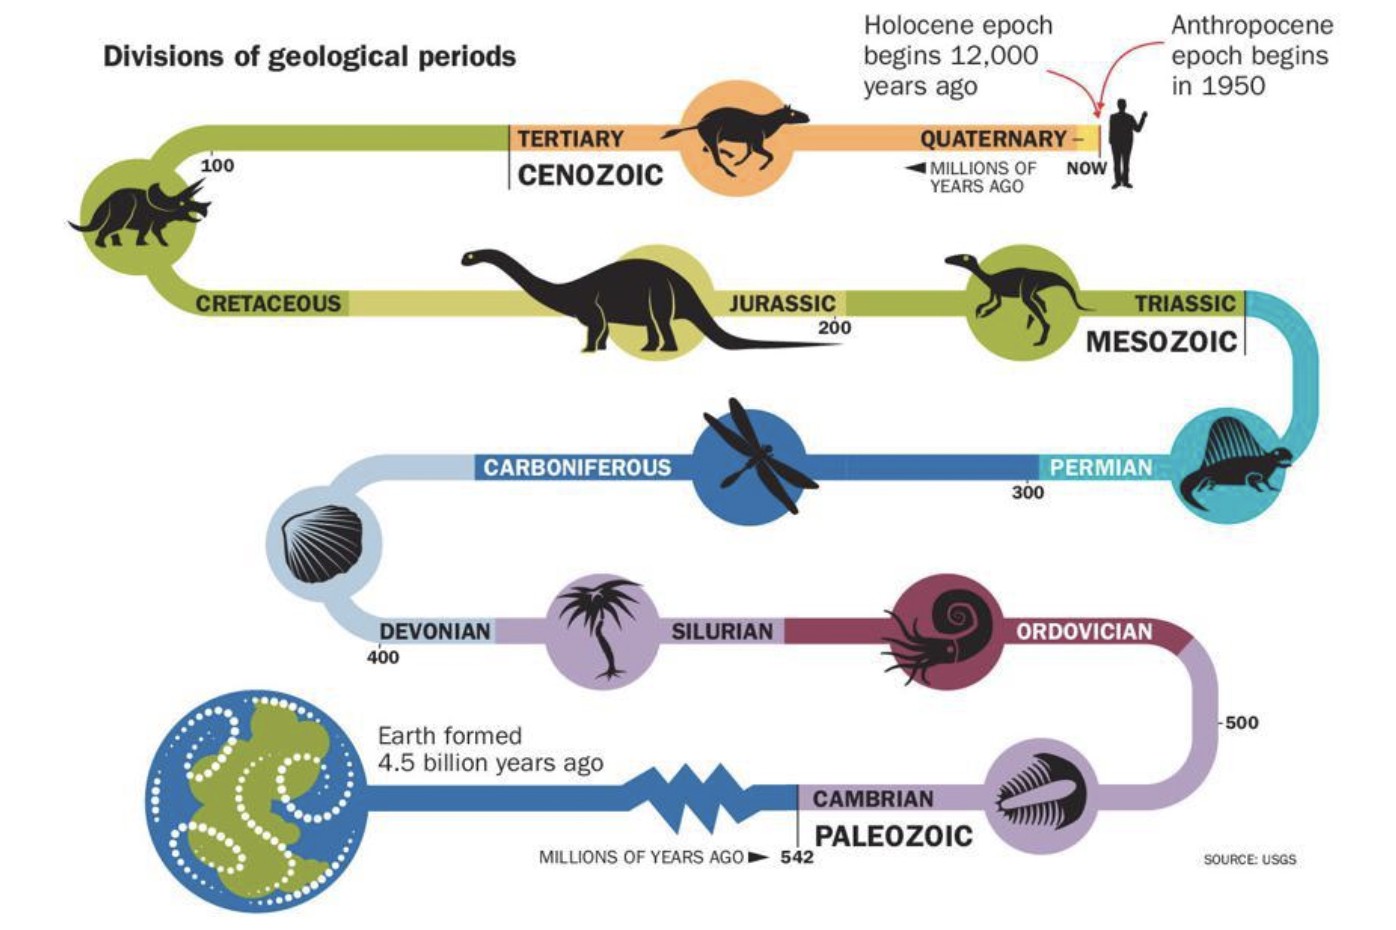 Chart showing division of geological periods